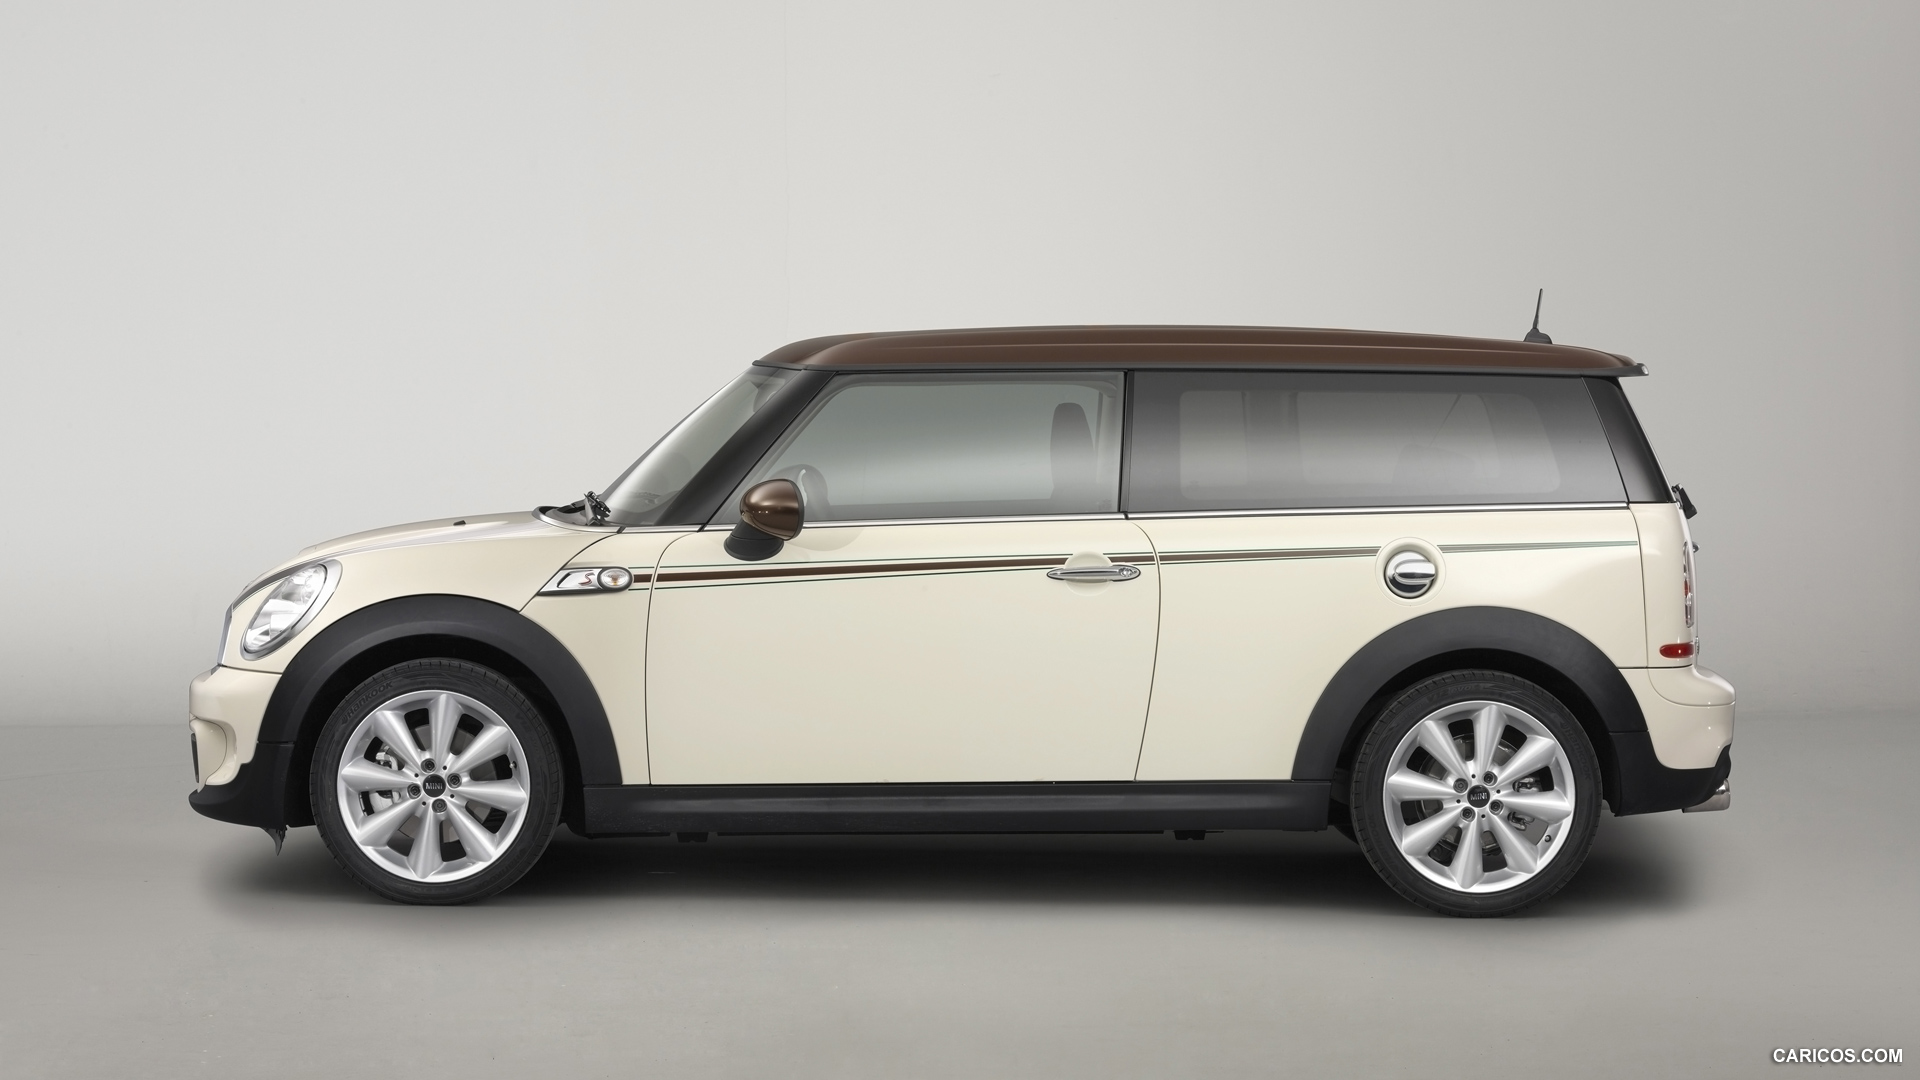  MINI Clubman Hyde Park (2013) - Side, #16 of 23